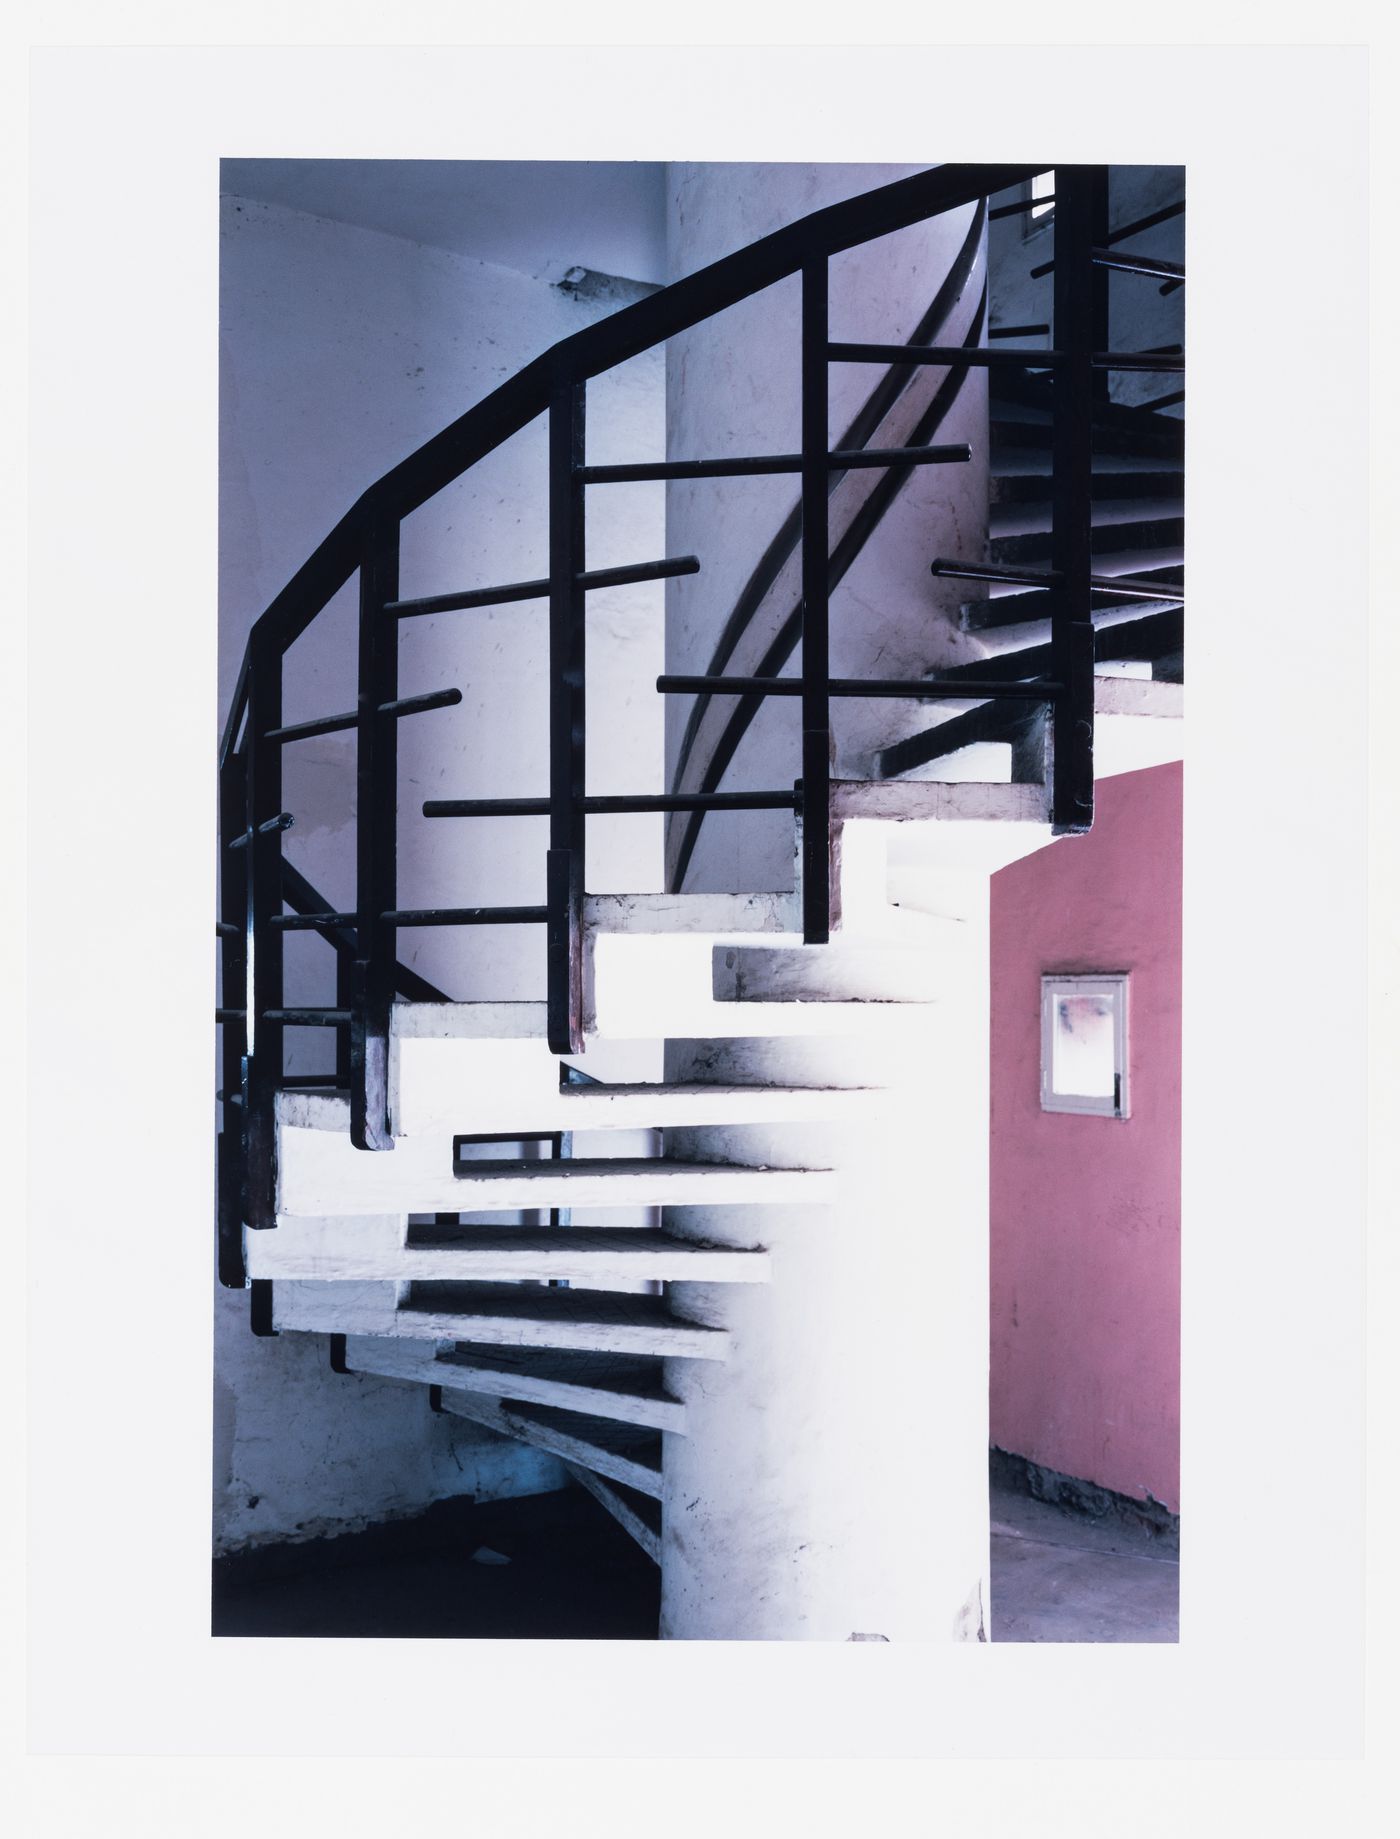 Pierre Jeanneret's home (Type 4-J), designed by the architect, Sector 5, Chandigarh, India